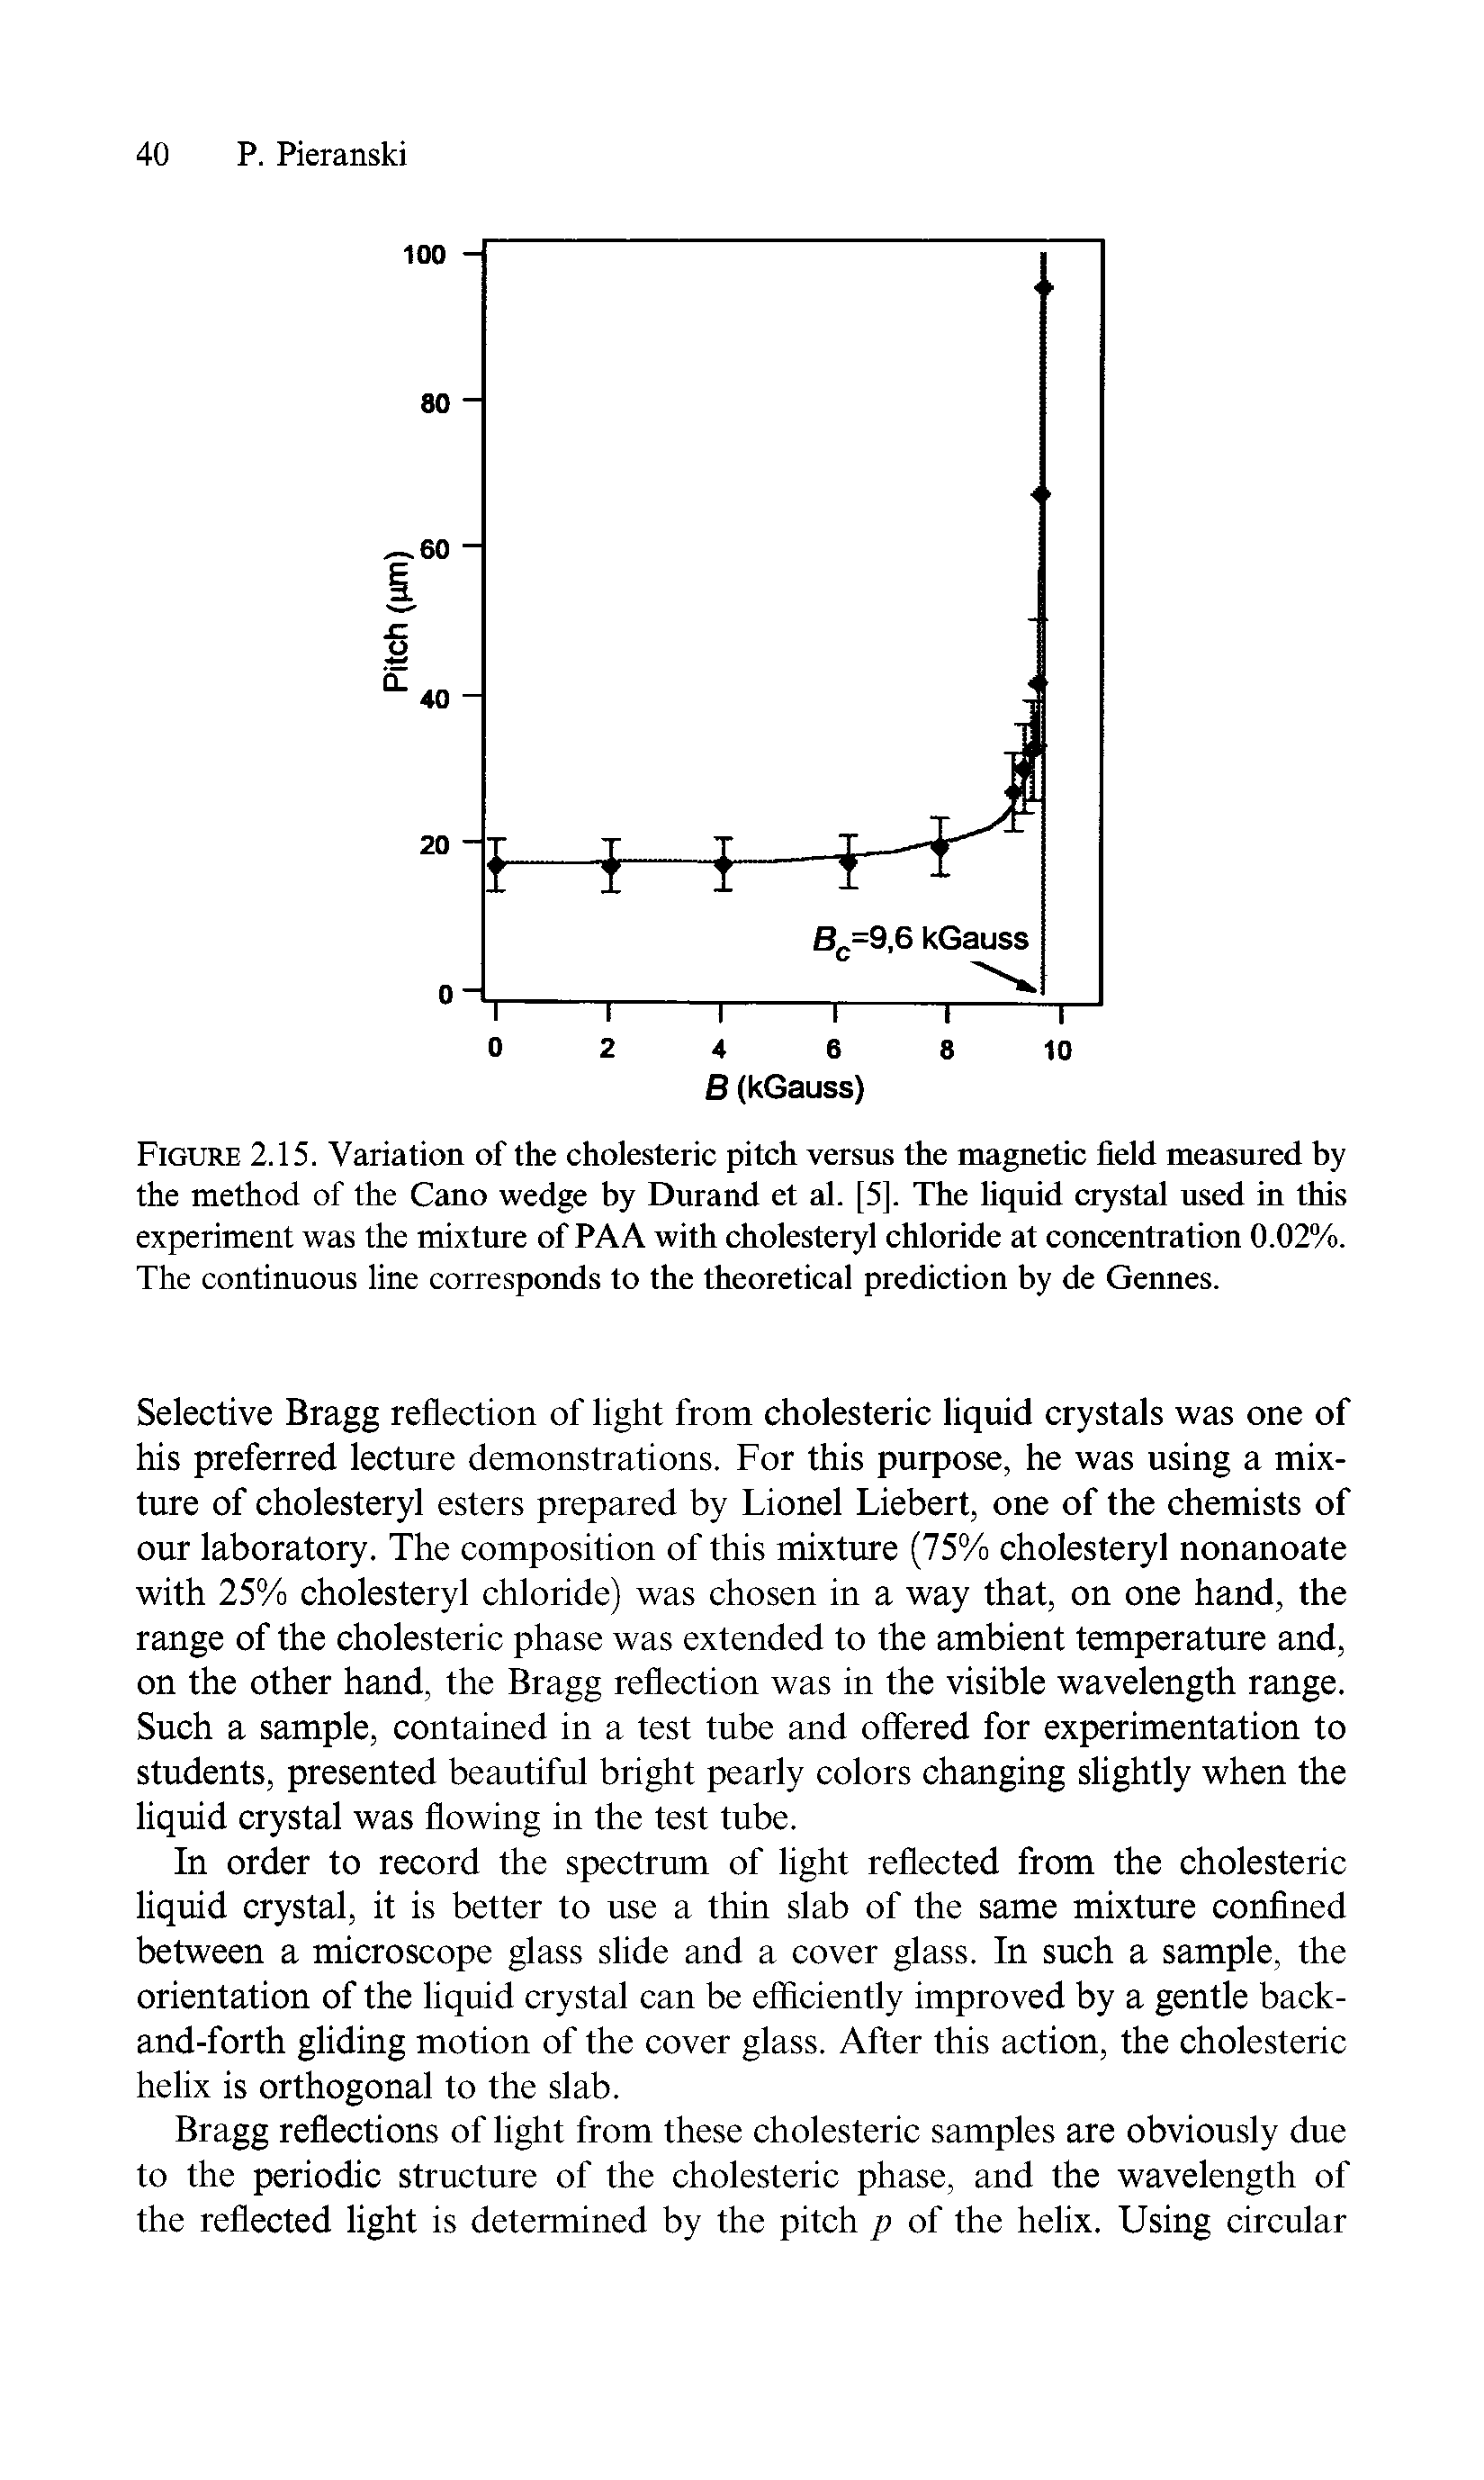 Figure 2.15. Variation of the cholesteric pitch versus the magnetic field measured by the method of the Cano wedge by Durand et al. [5]. The liquid crystal used in this experiment was the mixture of PA A with cholesteryl chloride at concentration 0.02%. The continuous line corresponds to the theoretical prediction by de Gennes.